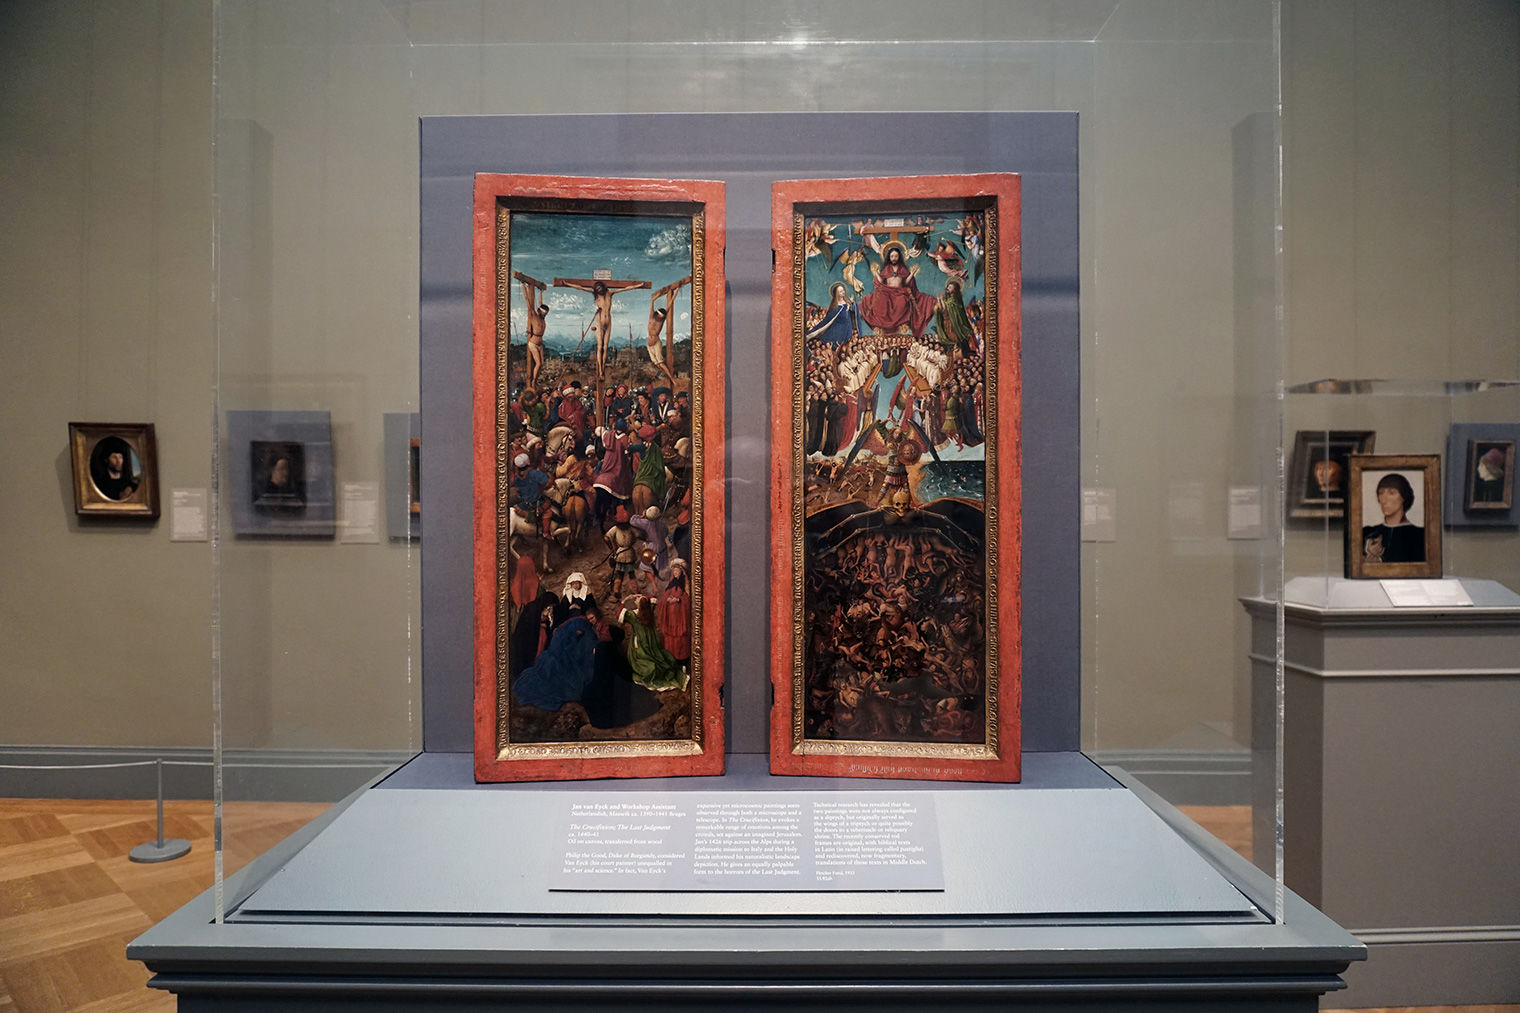 View of Jan van Eyck's "Crucifixion" and "Last Judgment" installed in a European paintings gallery at The Met Fifth Avenue